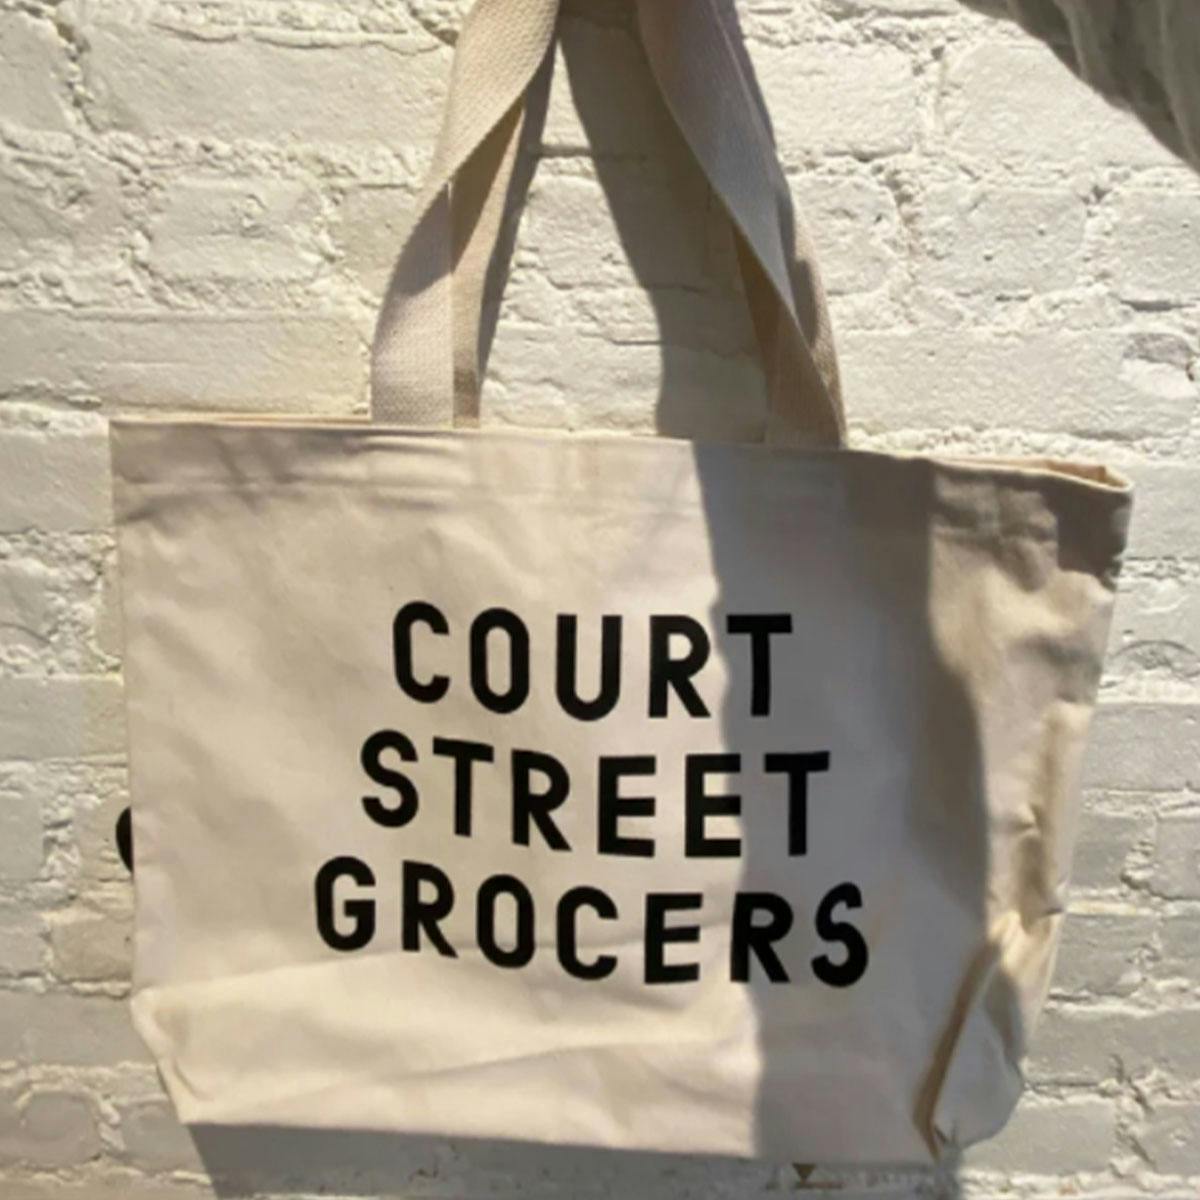 Court Street Grocers Tote Bag by Court Street Grocers Goldbelly